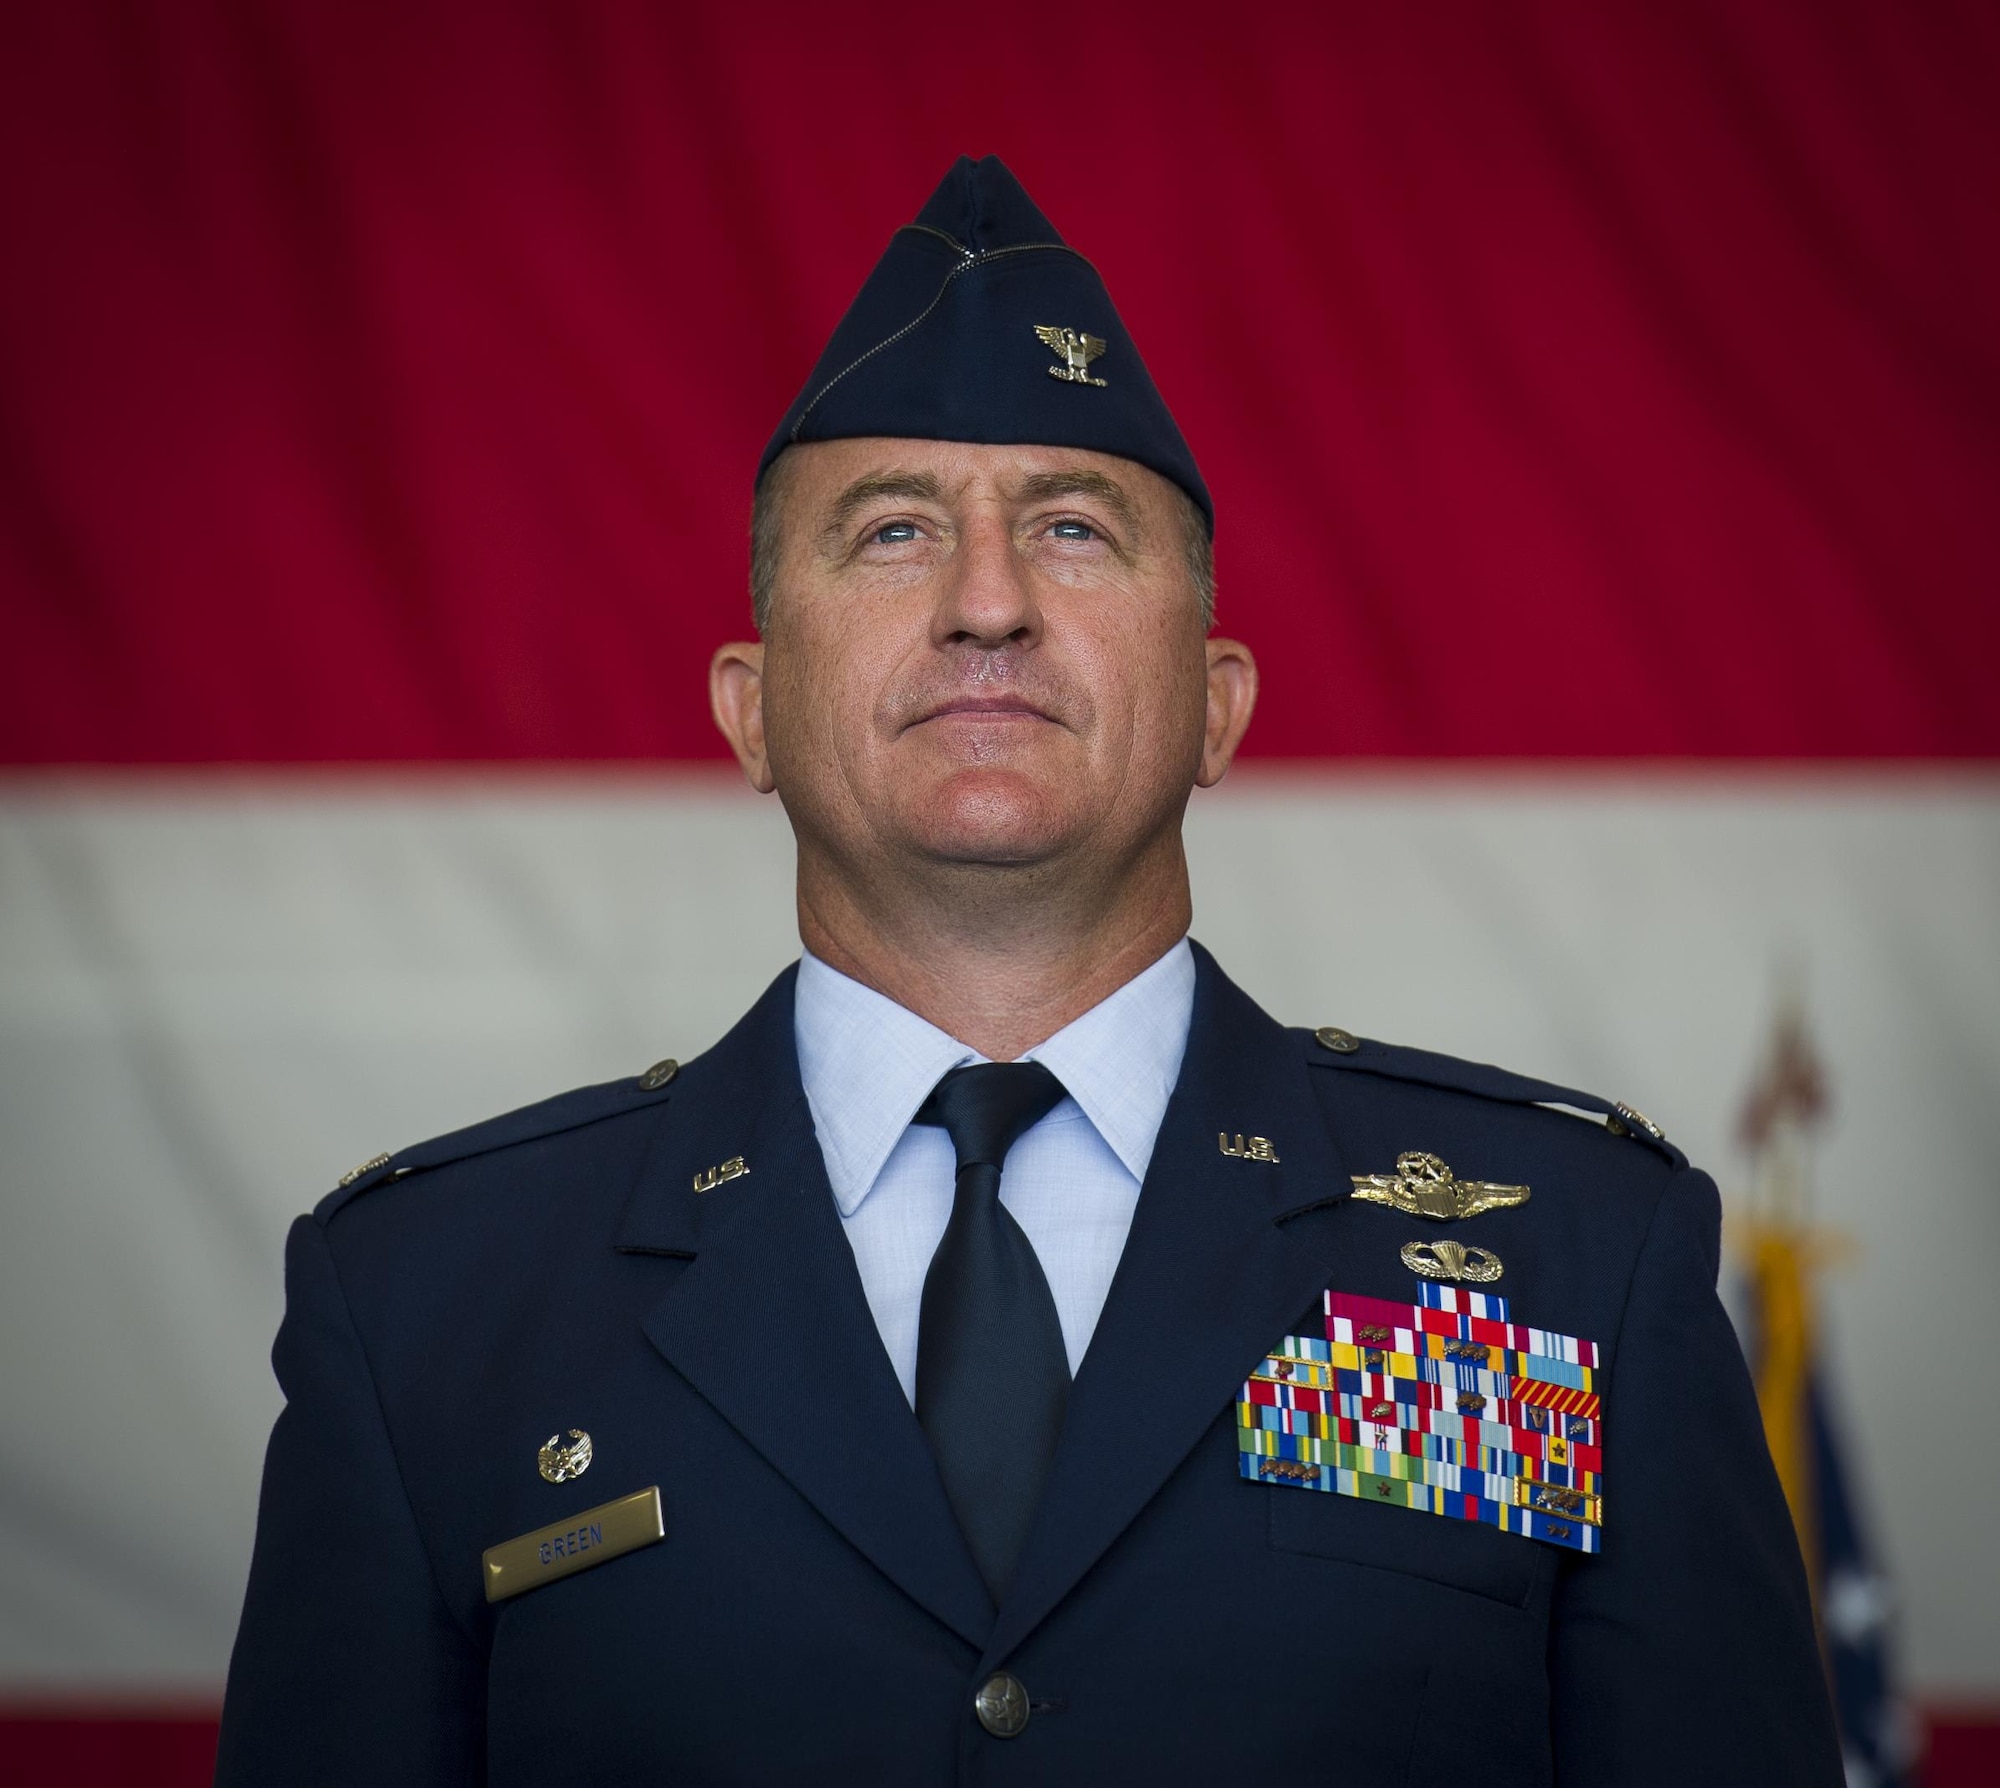 Col. Nathan Green stands after being appointed commander of the 492nd Special Operations Wing during an activation ceremony at Hurlburt Field, May 10, 2017. The designator for the 492nd SOW dates back to WWII when the 801st Bombardment Group was established at Harrington Field, England, in September 1943. Almost a year later, it would be redesignated as the 492nd Bombardment Group, a cover for their secret mission—Operation Carpetbagger. (U.S. Air Force photo by Airman 1st Class Joseph Pick)